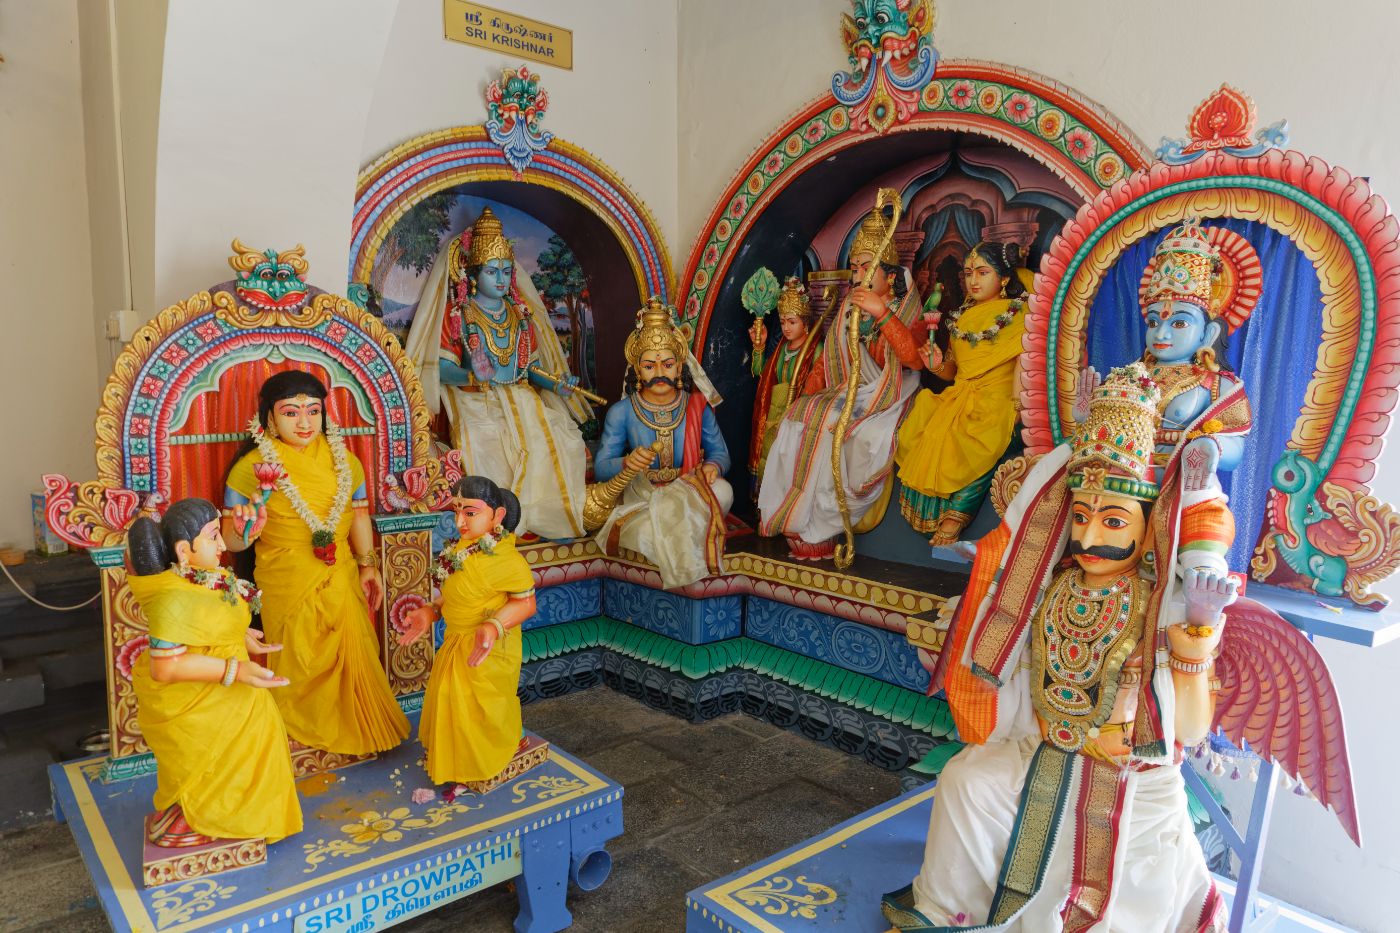 Idols of the Hindu gods who feature in the Mahabharata. Theemithi is based on this ancient Indian epic, and includes a series of rituals and ceremonies for these gods.